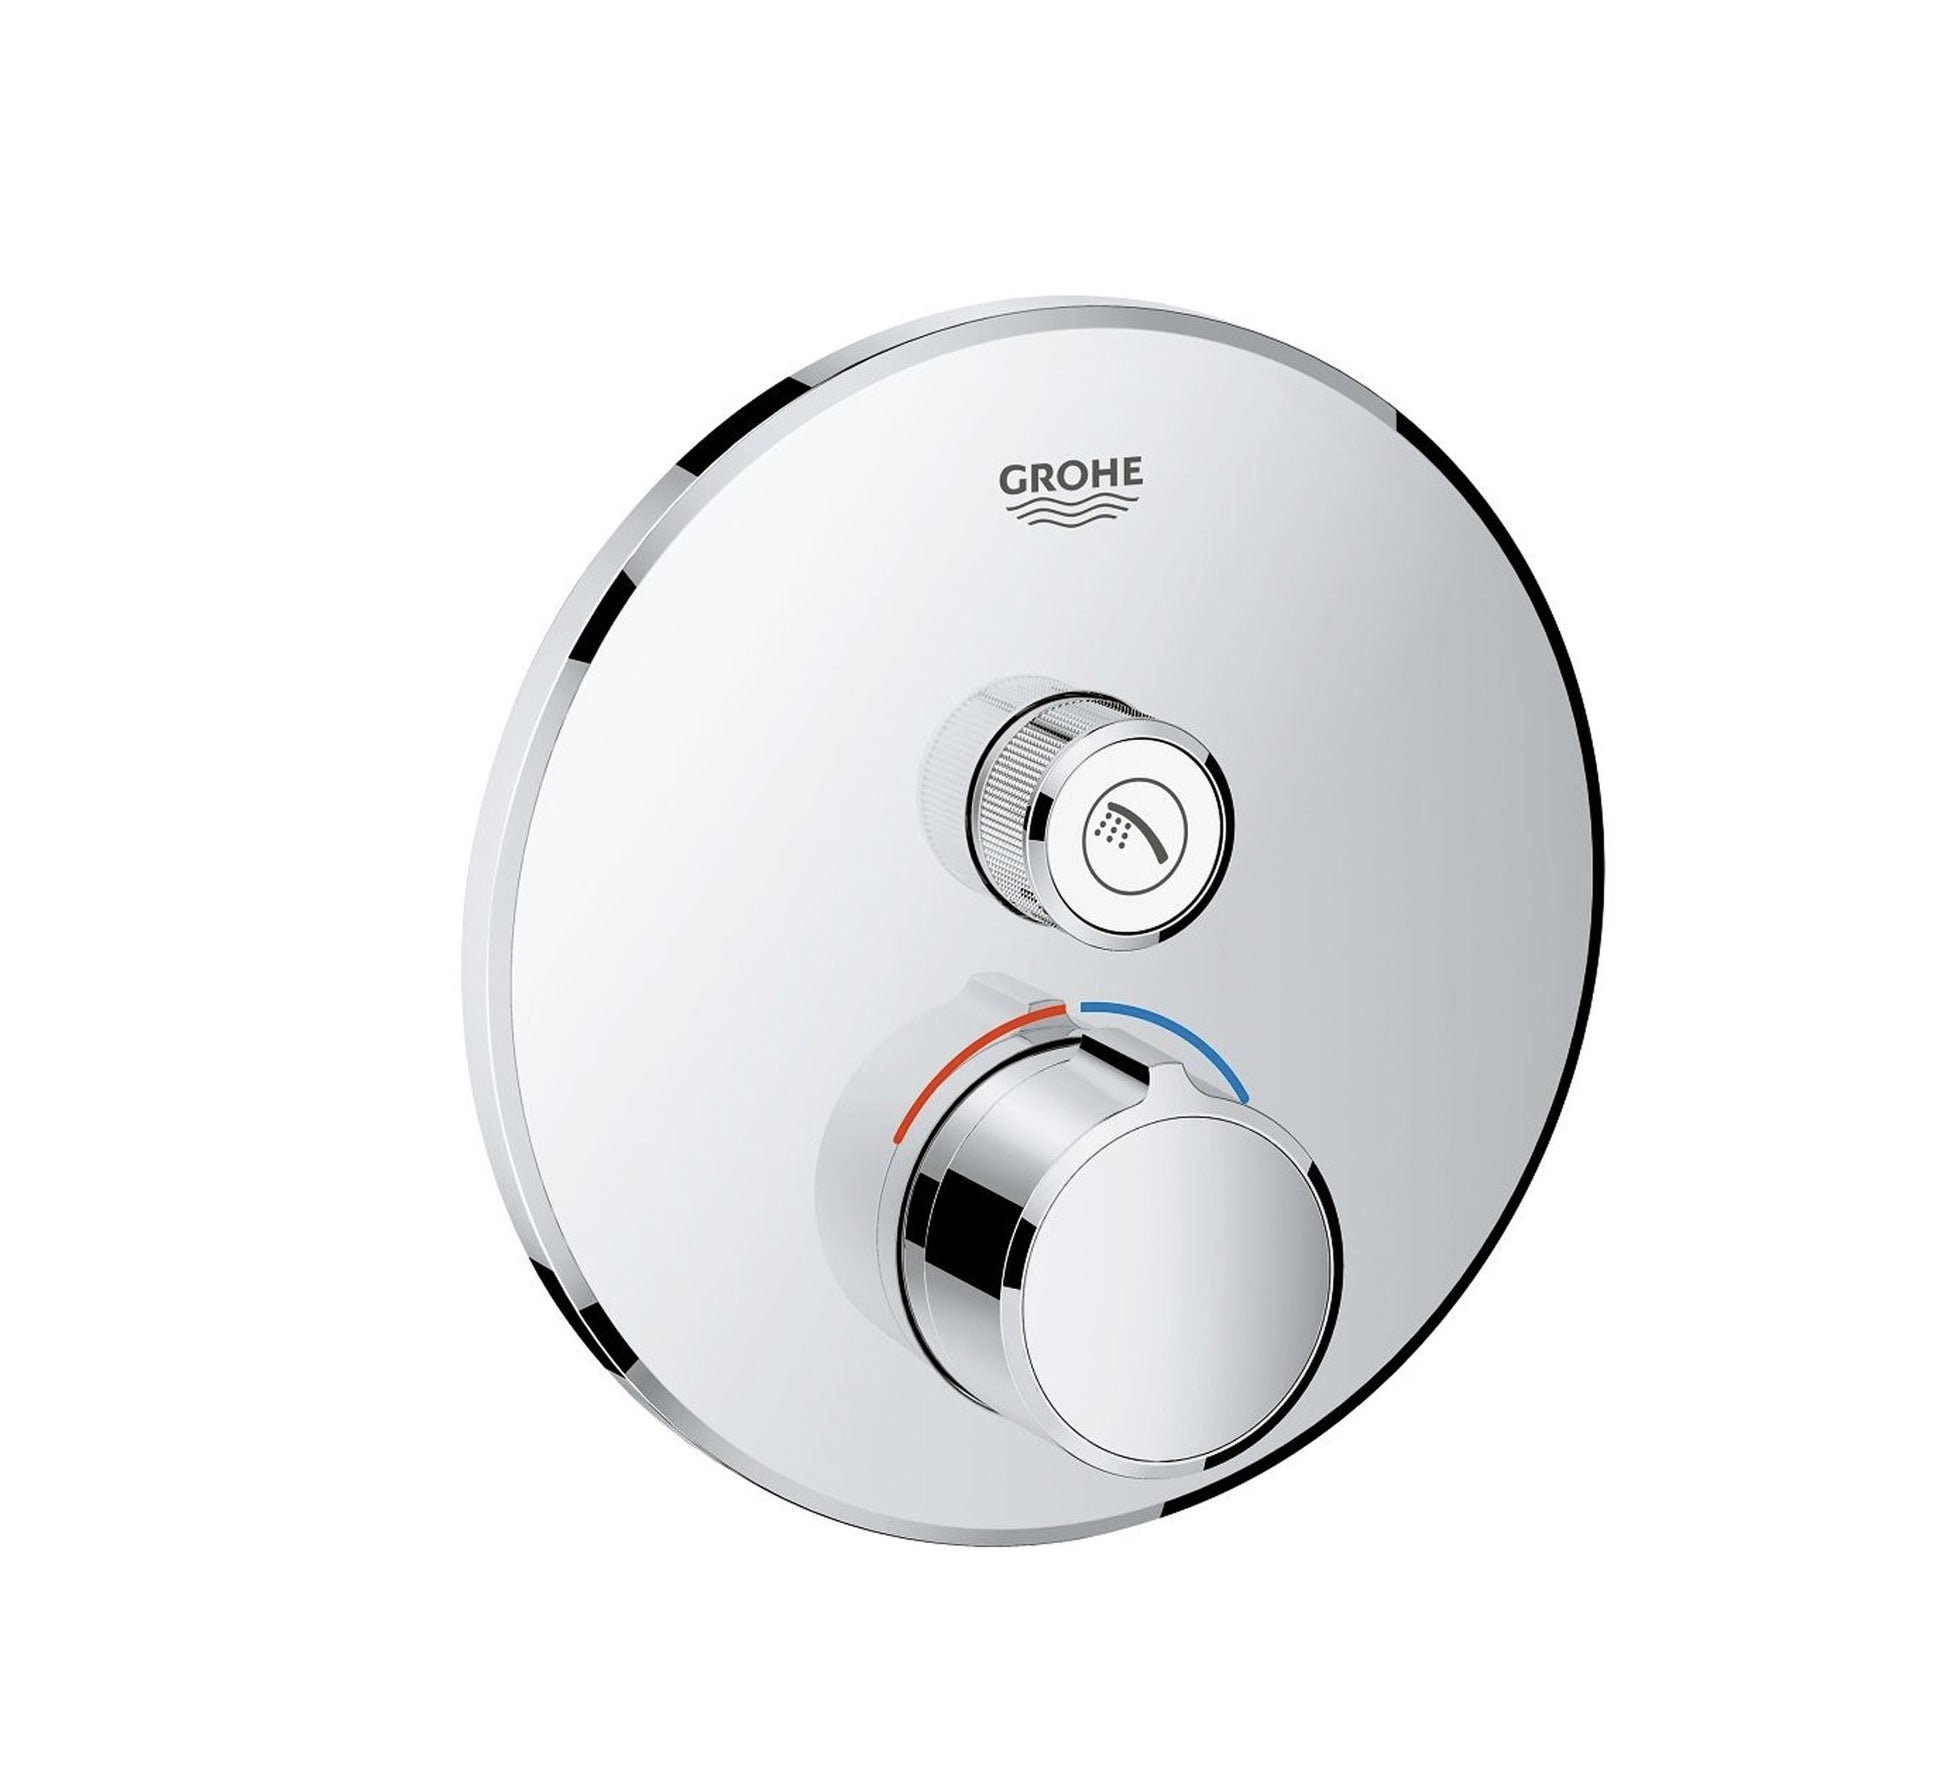 GROHE SMART CONTROL CONCEALED MIXER ROUND WITH ONE VALVE 1SC - 29144000 - Tadmur Trading